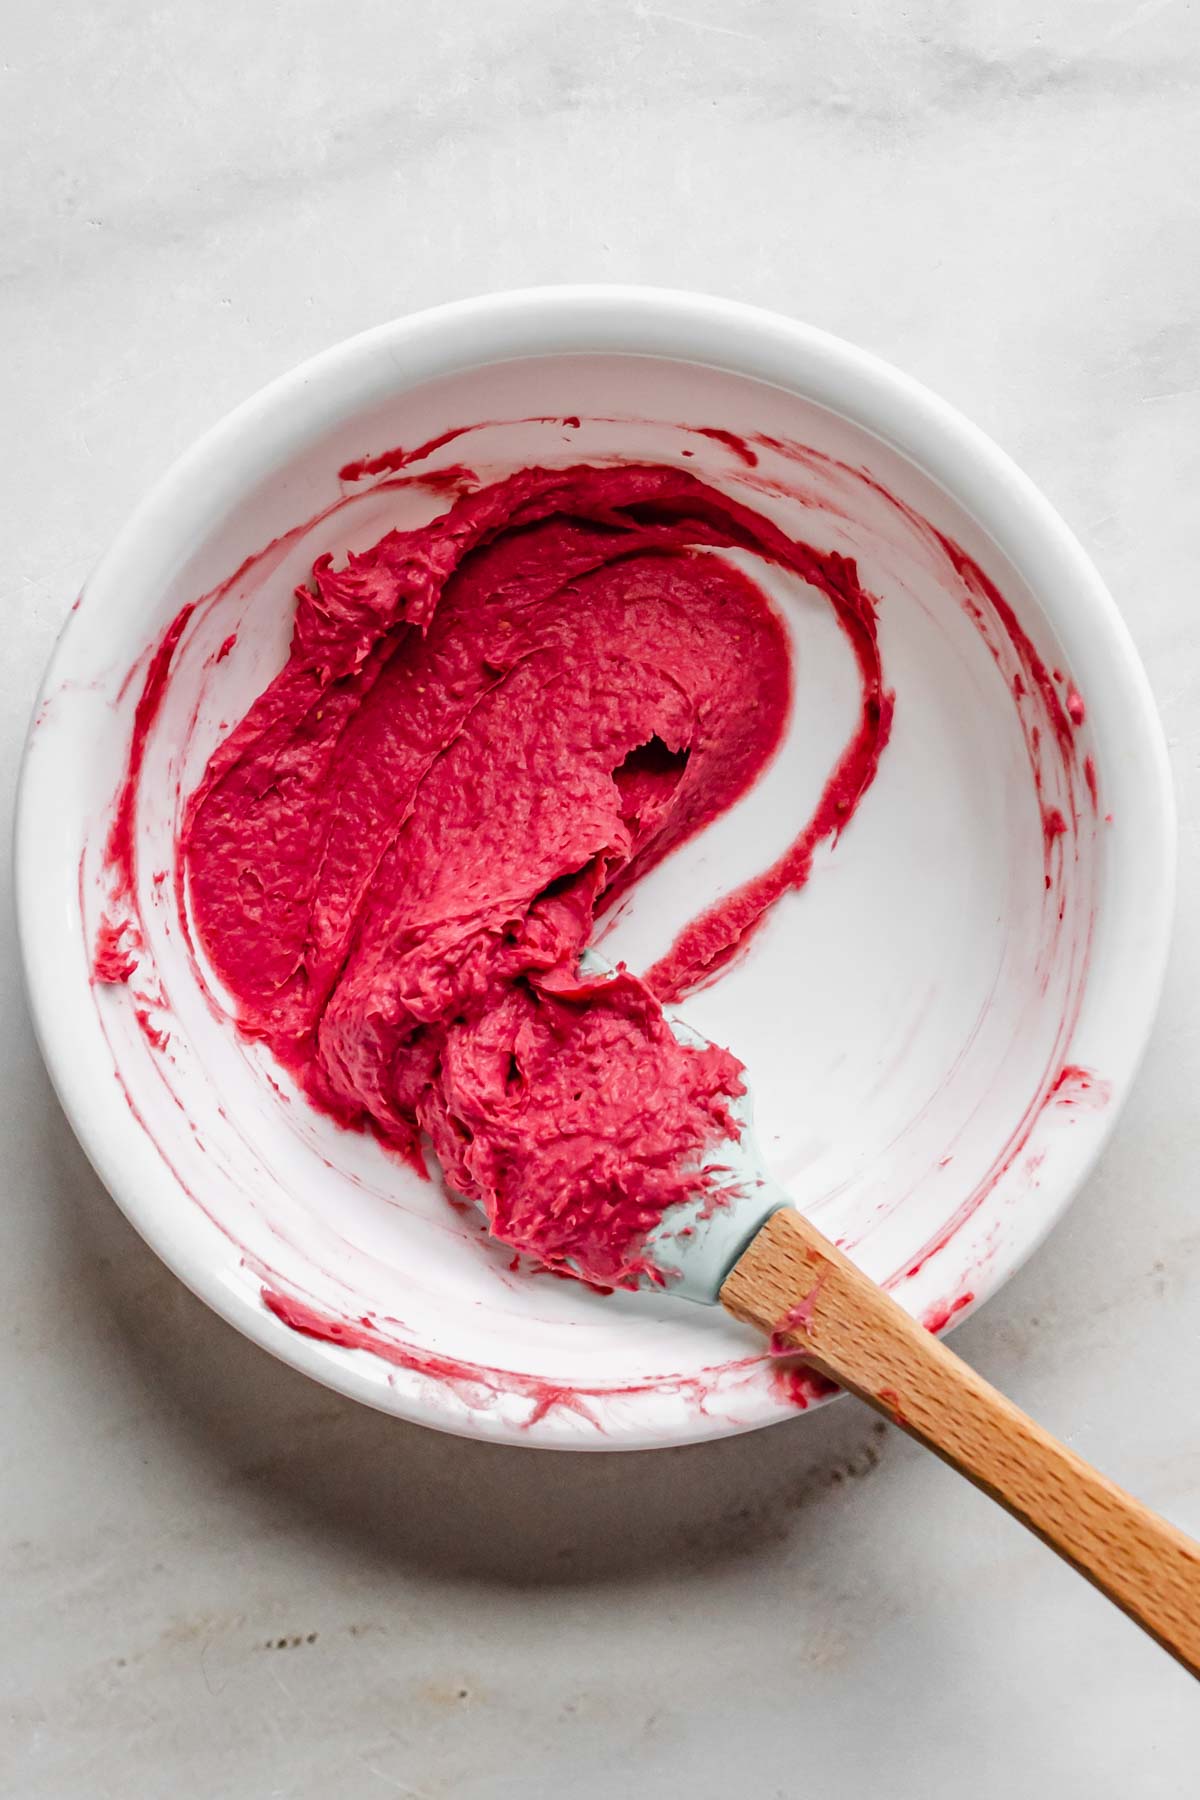 A hot pink paste is formed with freeze dried strawberry powder and heavy cream.